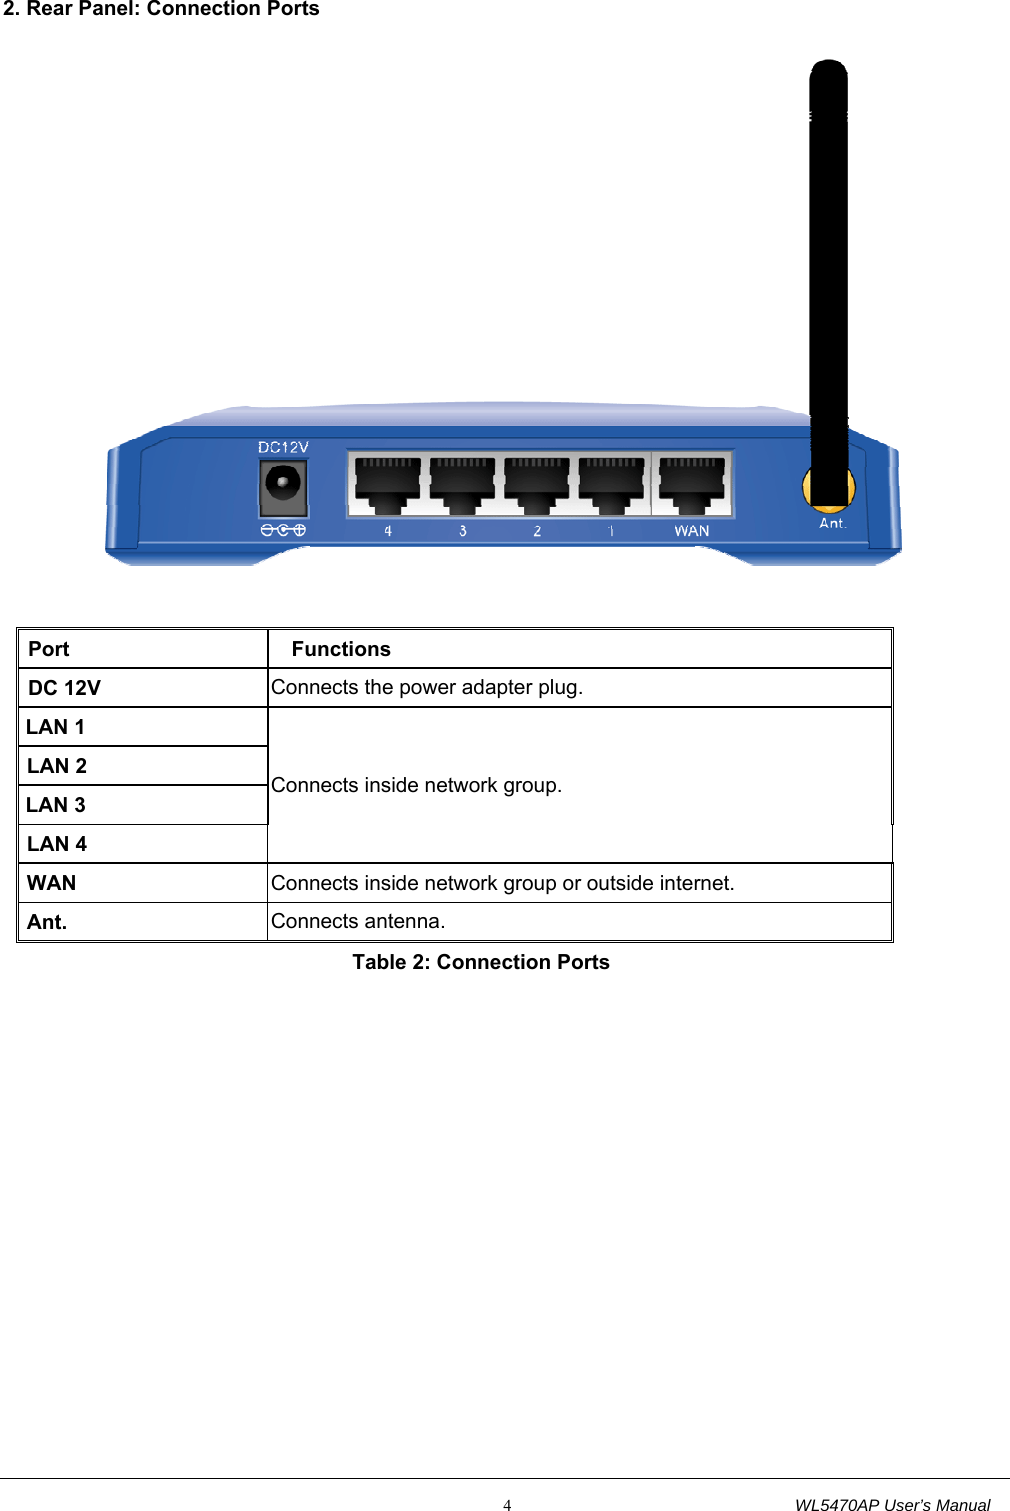                                                           4                                  WL5470AP User’s Manual 2. Rear Panel: Connection Ports   Port    Functions DC 12V    Connects the power adapter plug. LAN 1 Connects inside network group. LAN 2 LAN 3 LAN 4 WAN  Connects inside network group or outside internet. Ant.  Connects antenna. Table 2: Connection Ports 